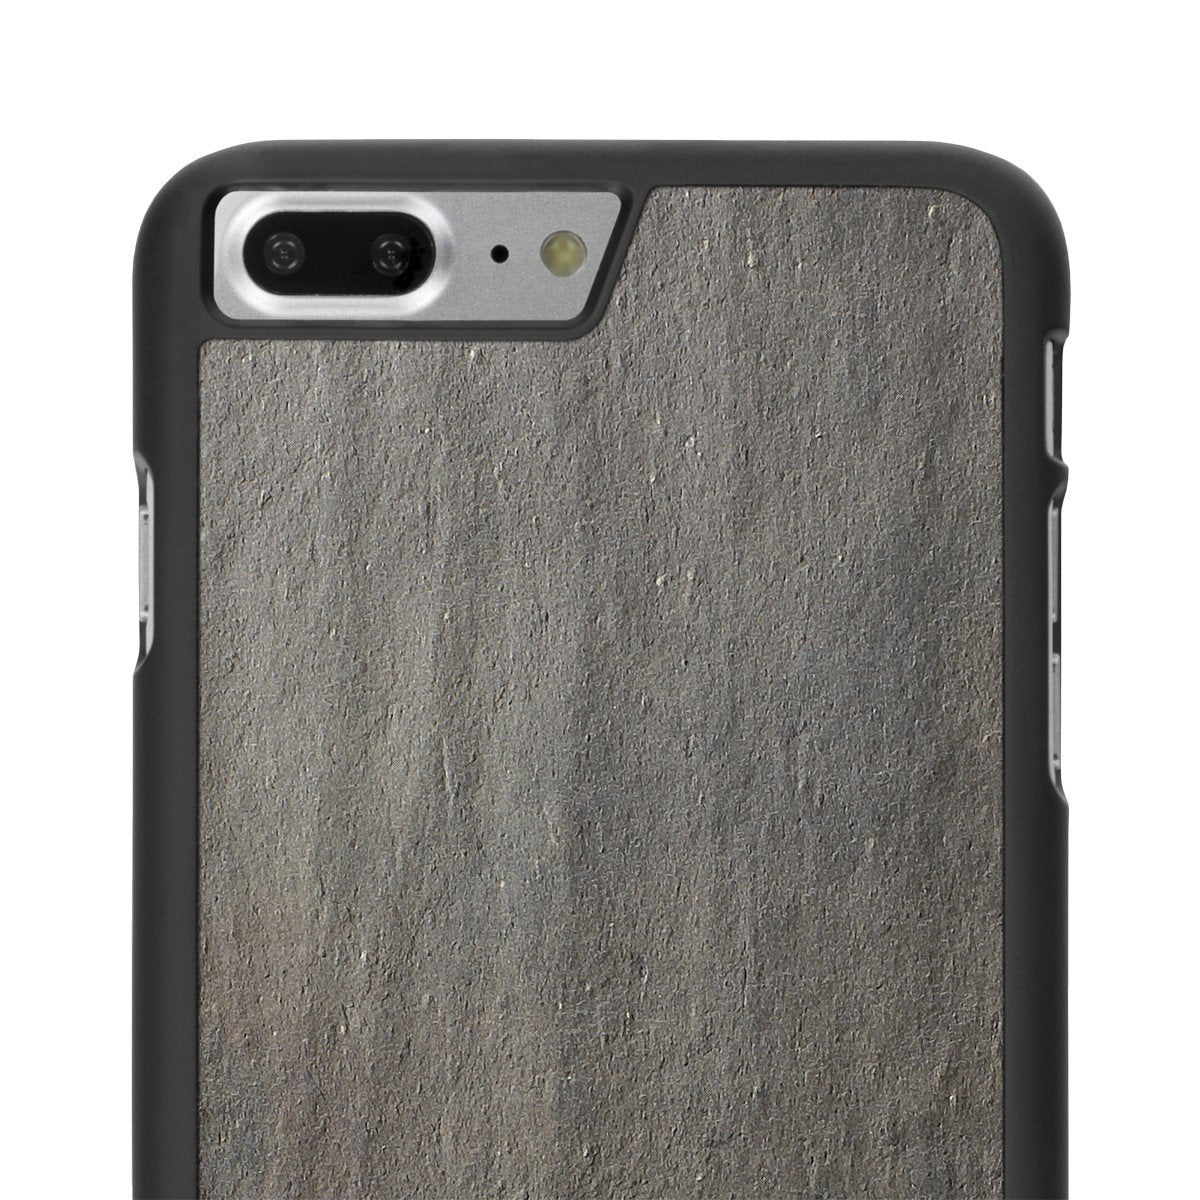  iPhone 7 Plus —  Stone Snap Case - Cover-Up - 6